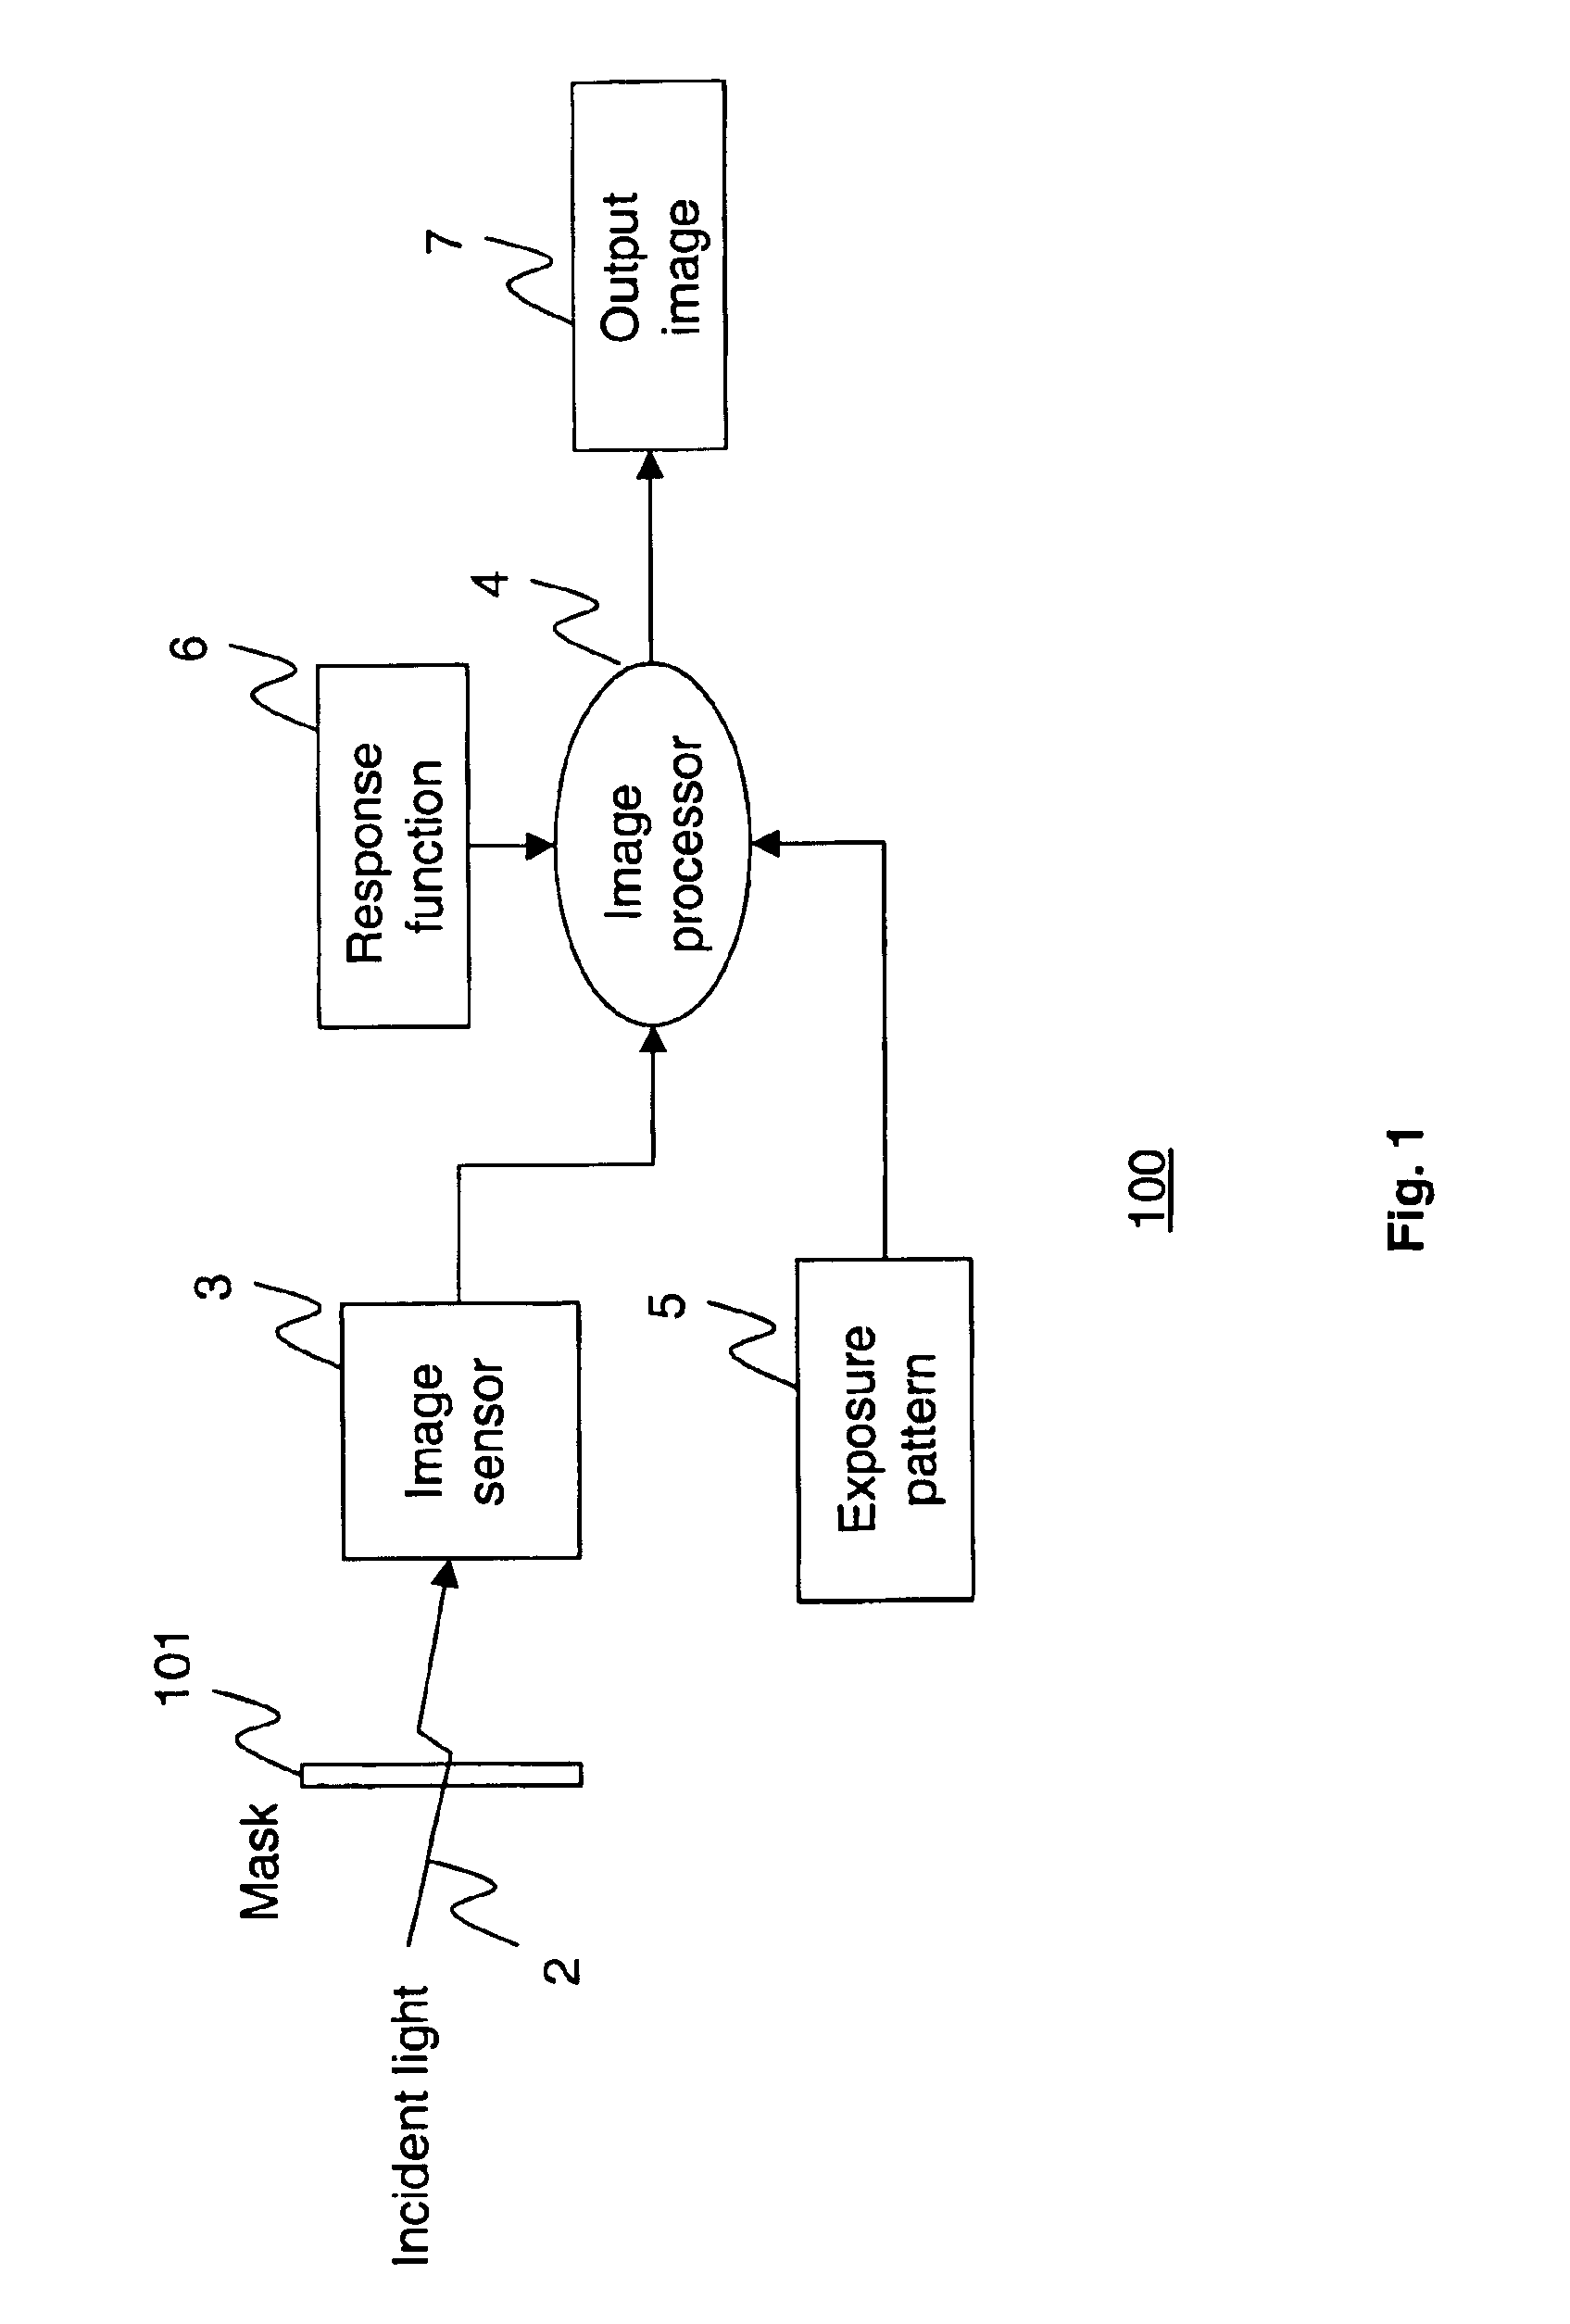 Apparatus and method for high dynamic range imaging using spatially varying exposures